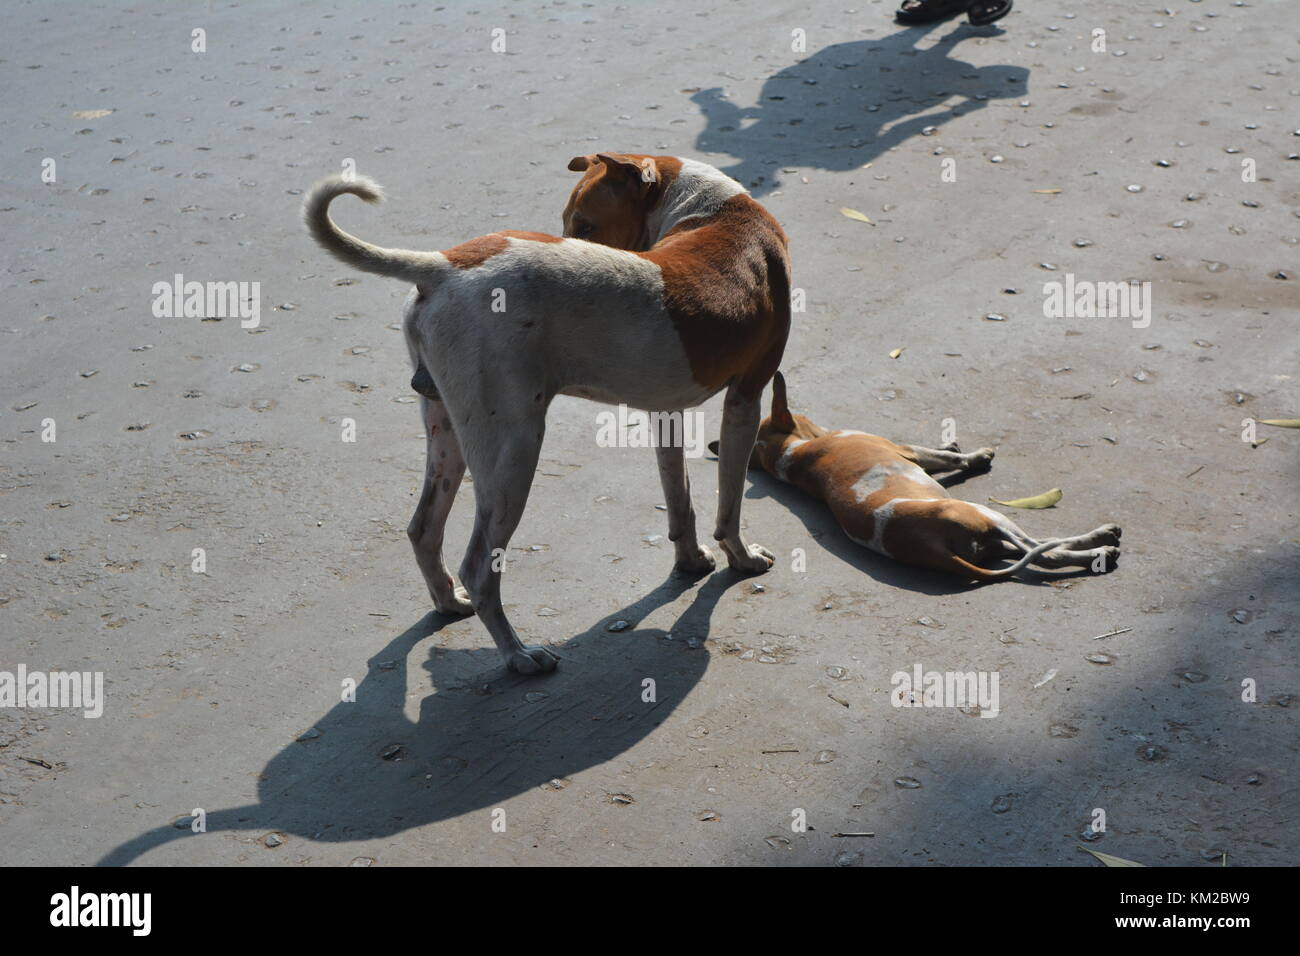 Kolkata, India, 3rd December 2017. Indian Street dog sleeps on Sunday morning in four lane Barrackpore Trunk Road otherwise heavily trafficked on other days. The father dog cares the child. Credit: Rupa Ghosh/Alamy Live News. Stock Photo